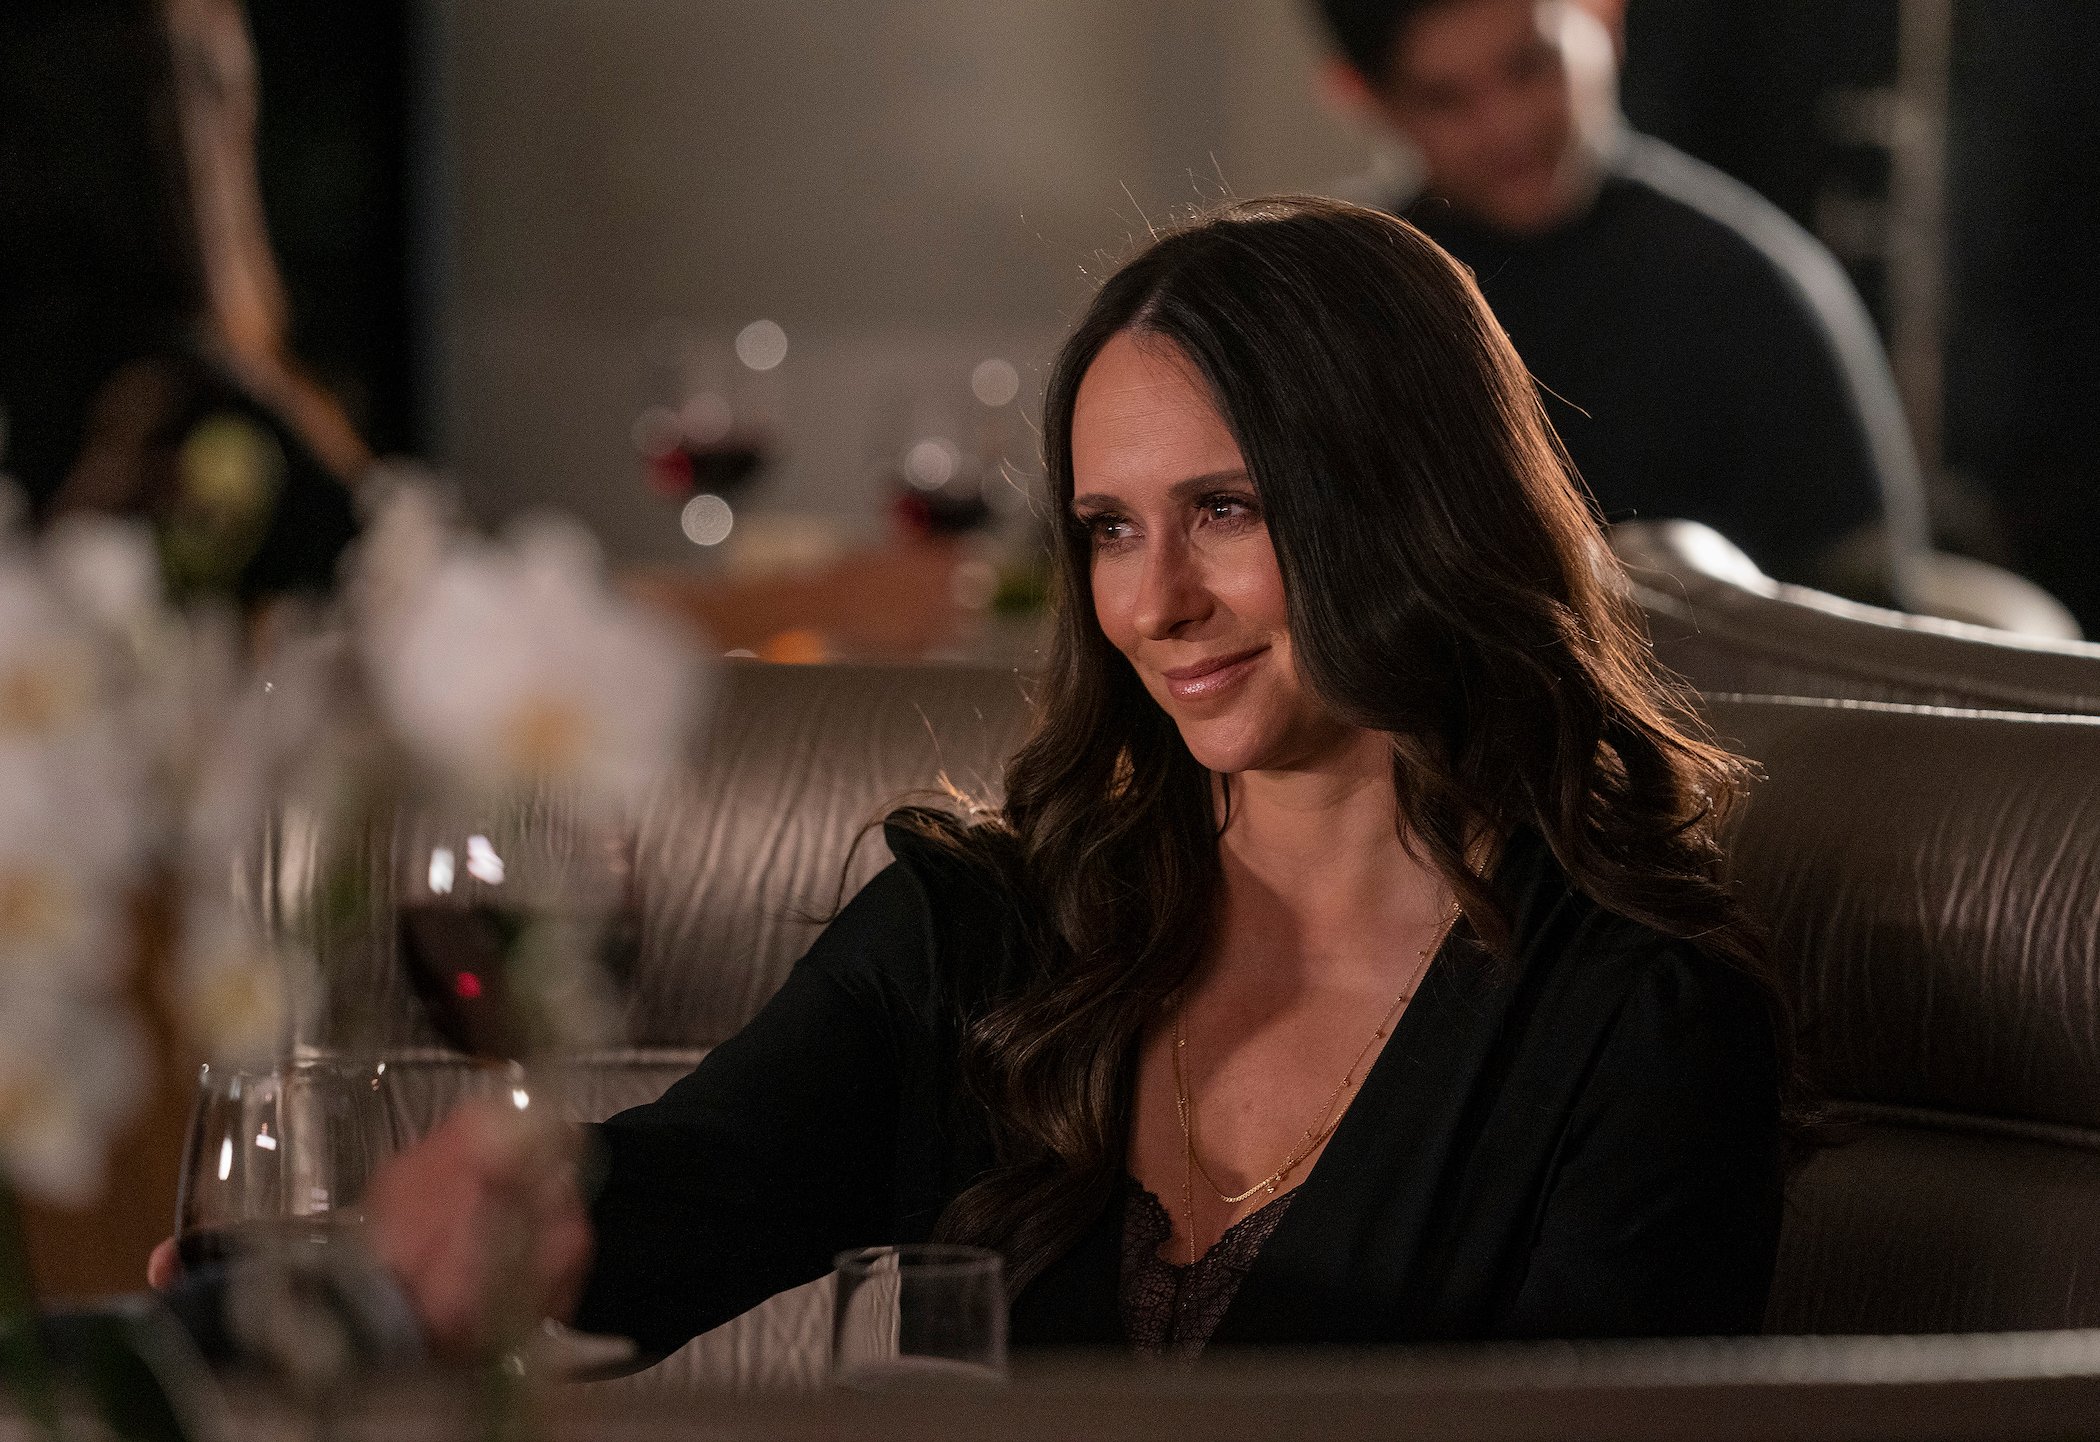 '9-1-1' Season 5 star Jennifer Love Hewitt as Maddie smiling while holding a glass of red wine